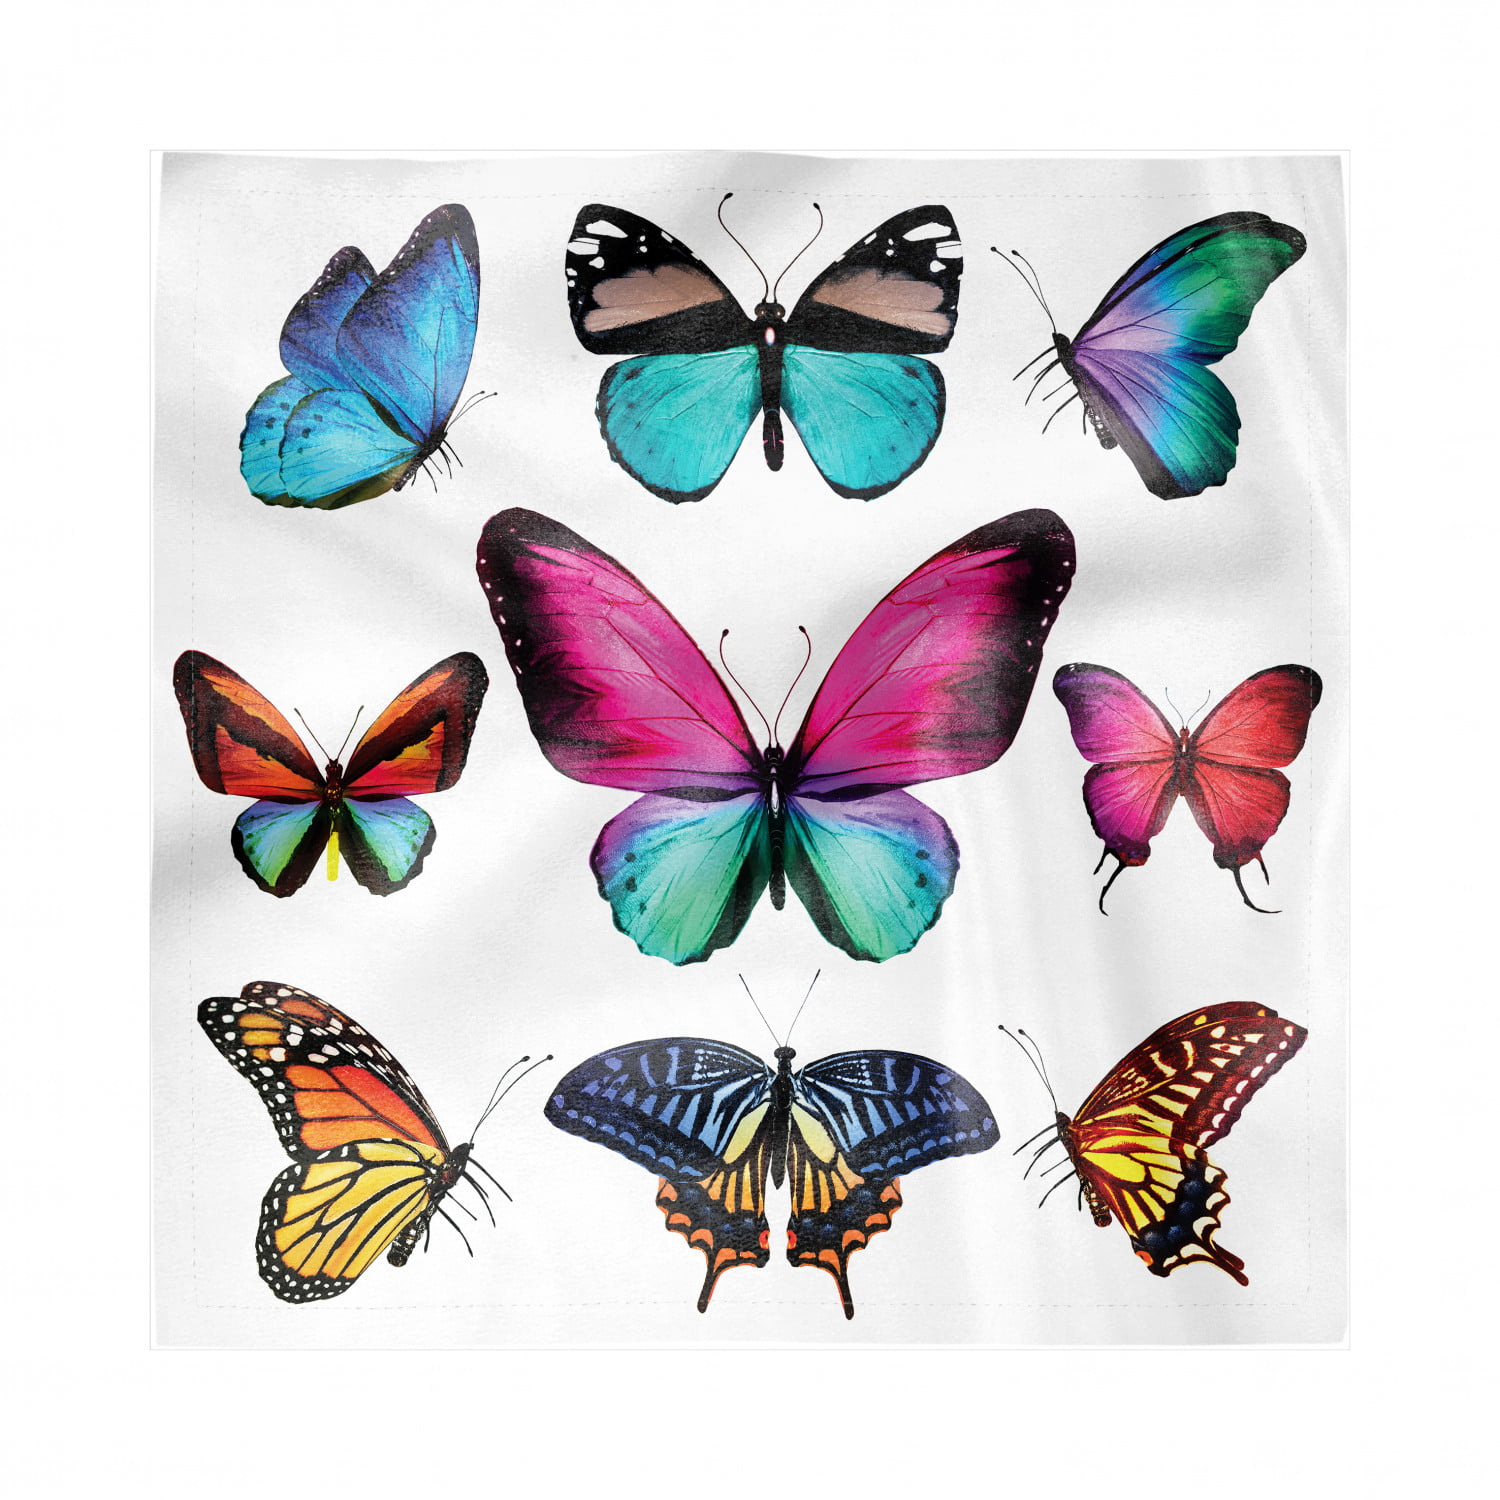 Washable Fabric Placemats for Dining Room Kitchen Table Decor Multicolor Ambesonne Dragonfly Place Mats Set of 4 Sixties Inspired Colorful Wings Spring Woodland Animals Pattern Wildlife Elements